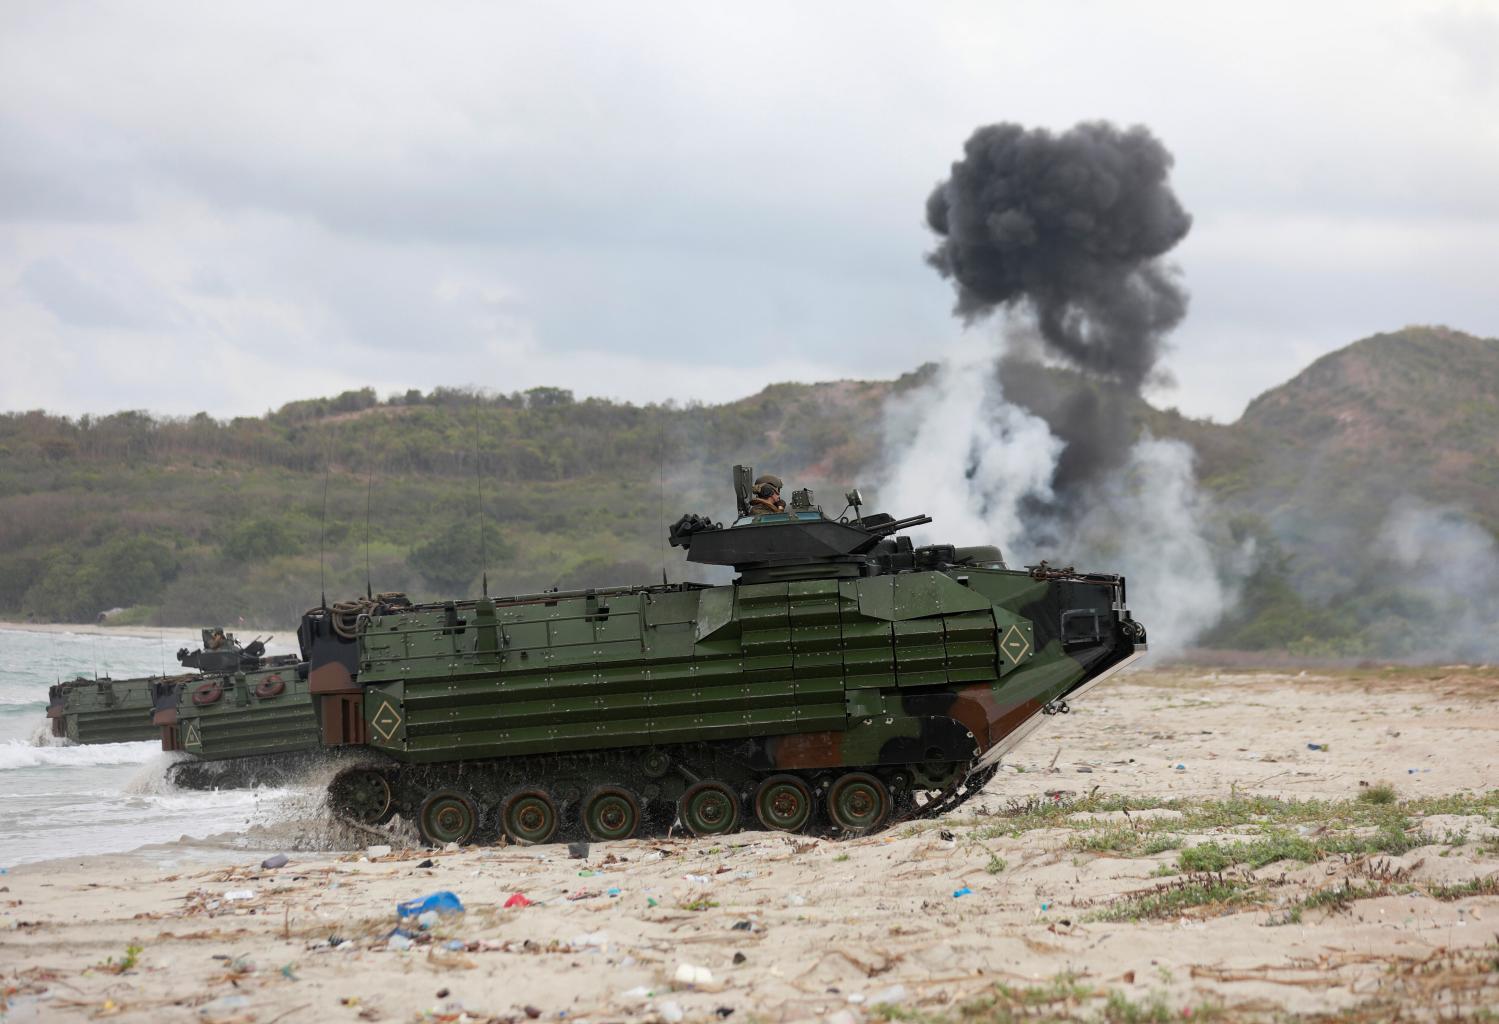 Tanks take part in the Amphibious Assault Demonstration during the Cobra Gold multilateral military exercise in Hat Yao Beach, Sattahip District, Chonburi Province, Thailand February 28, 2020. REUTERS/Soe Zeya Tun